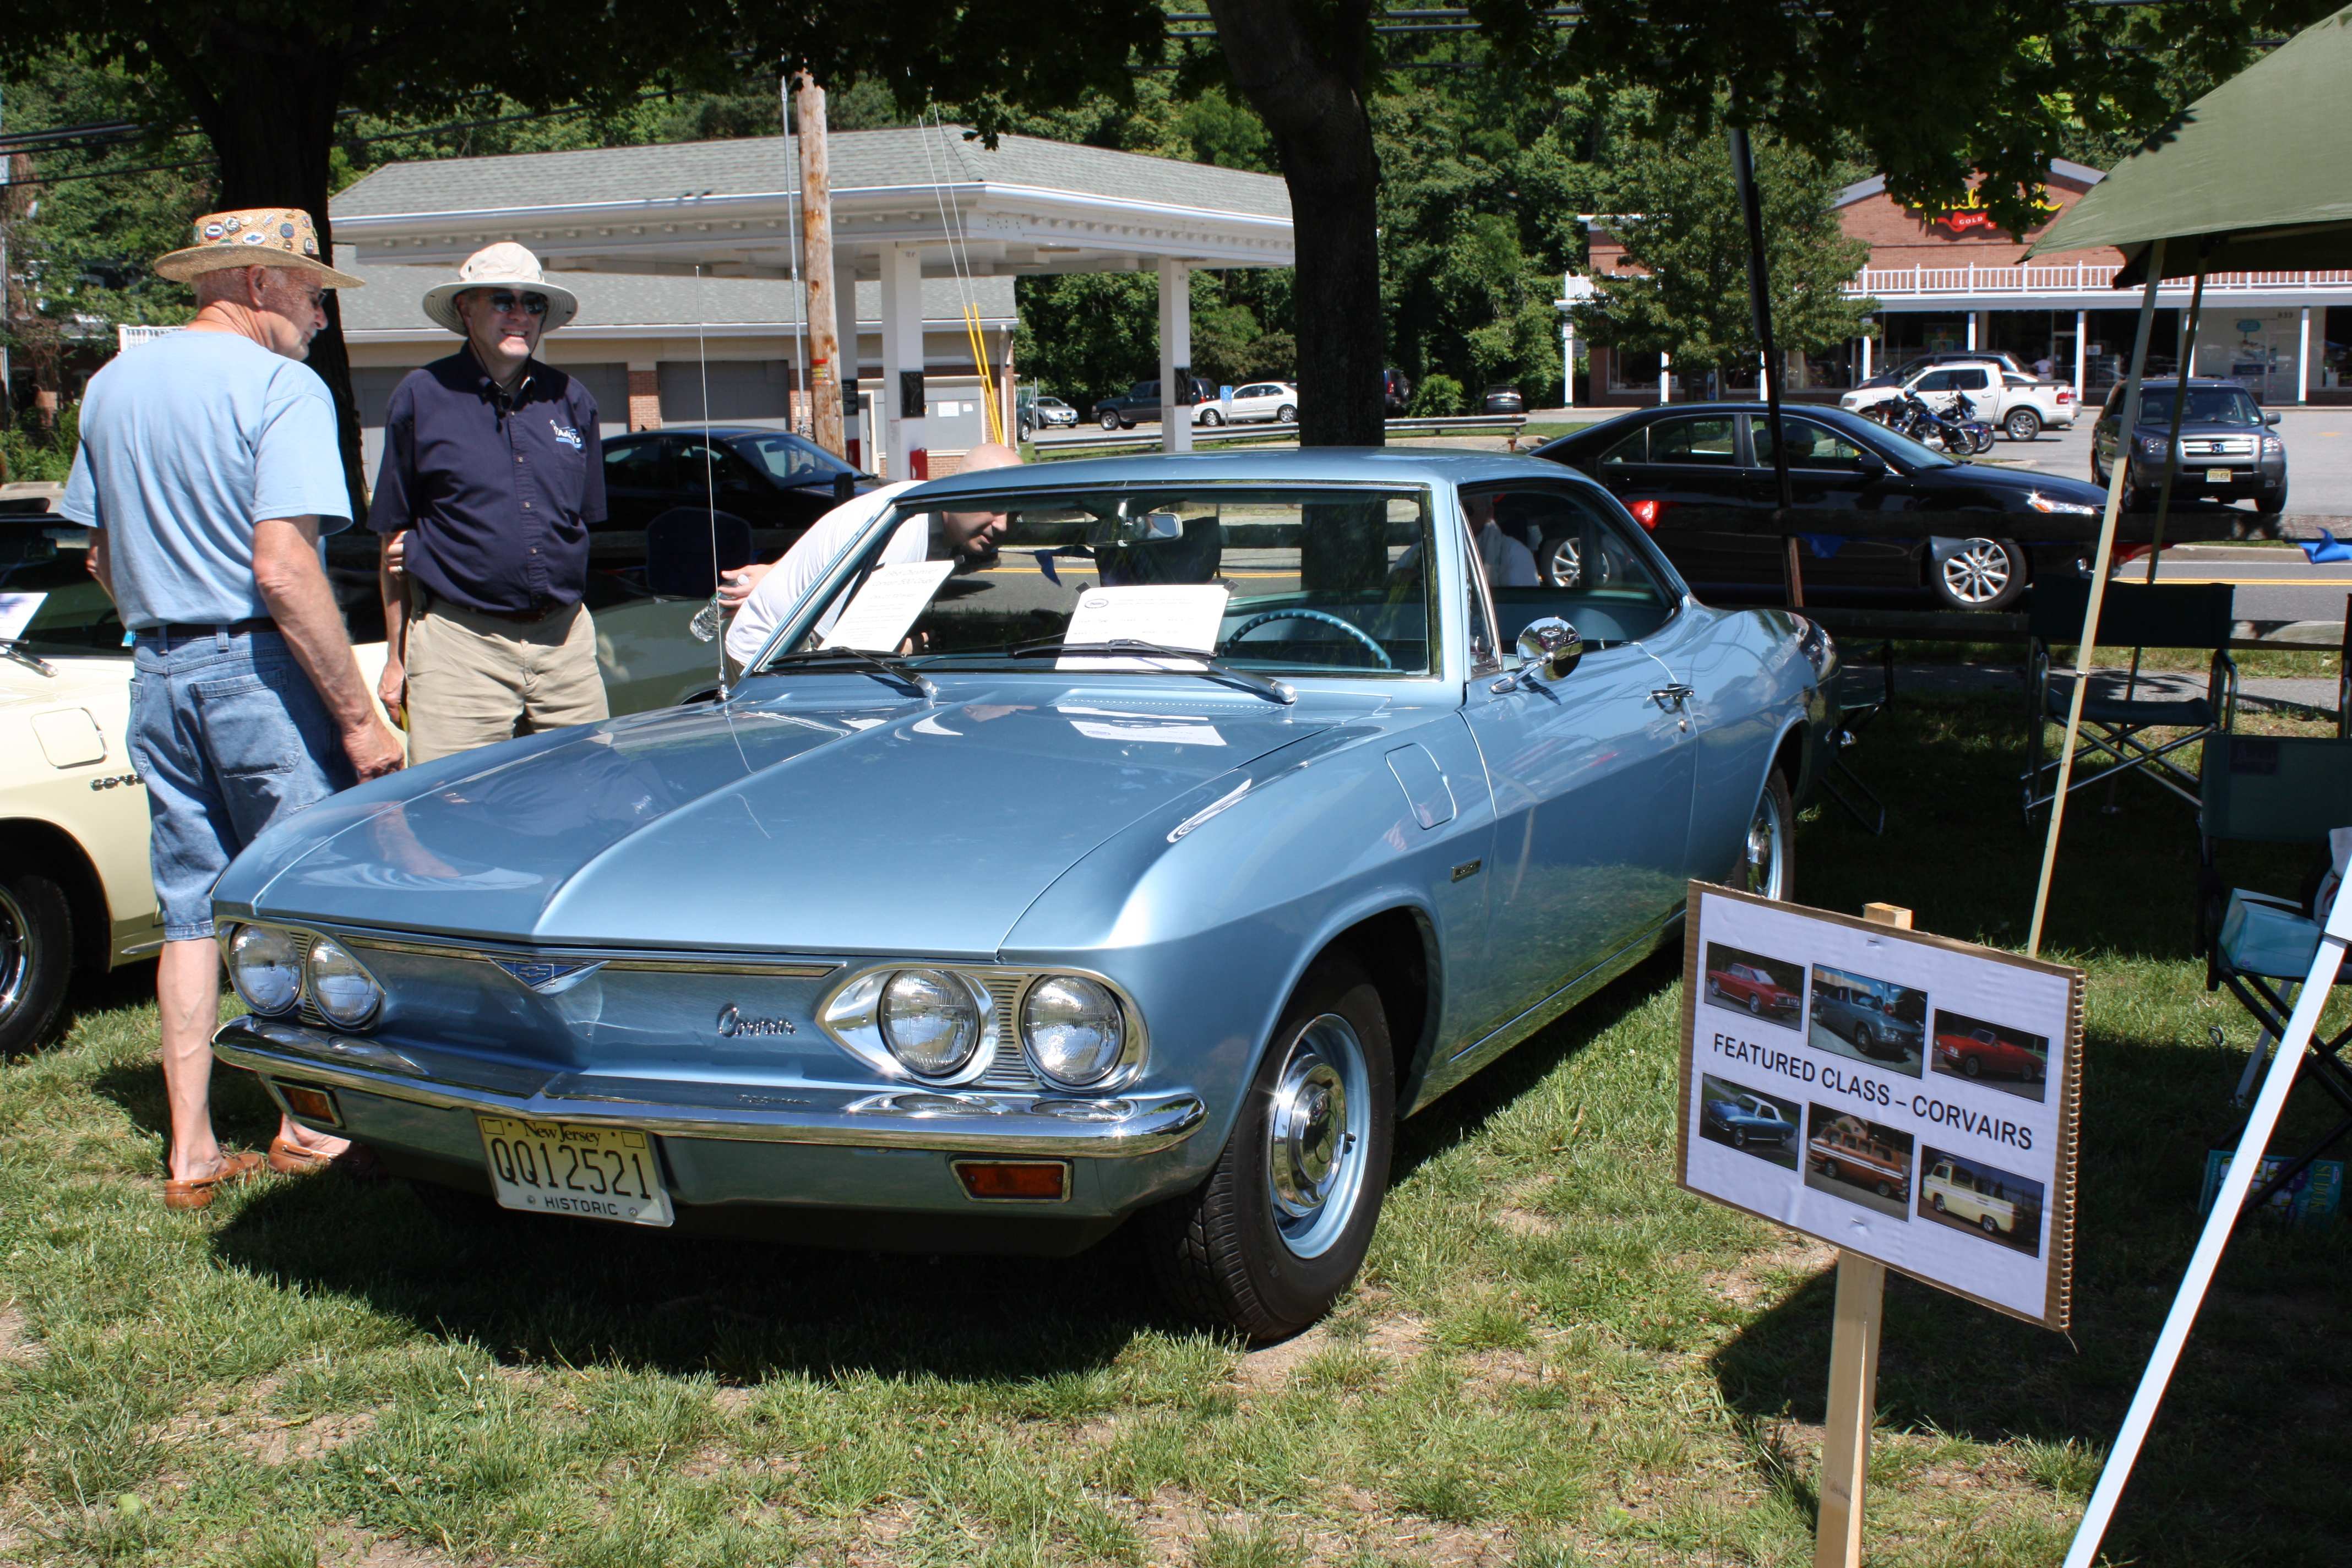 New Jersey Association of Corvair Enthusiasts